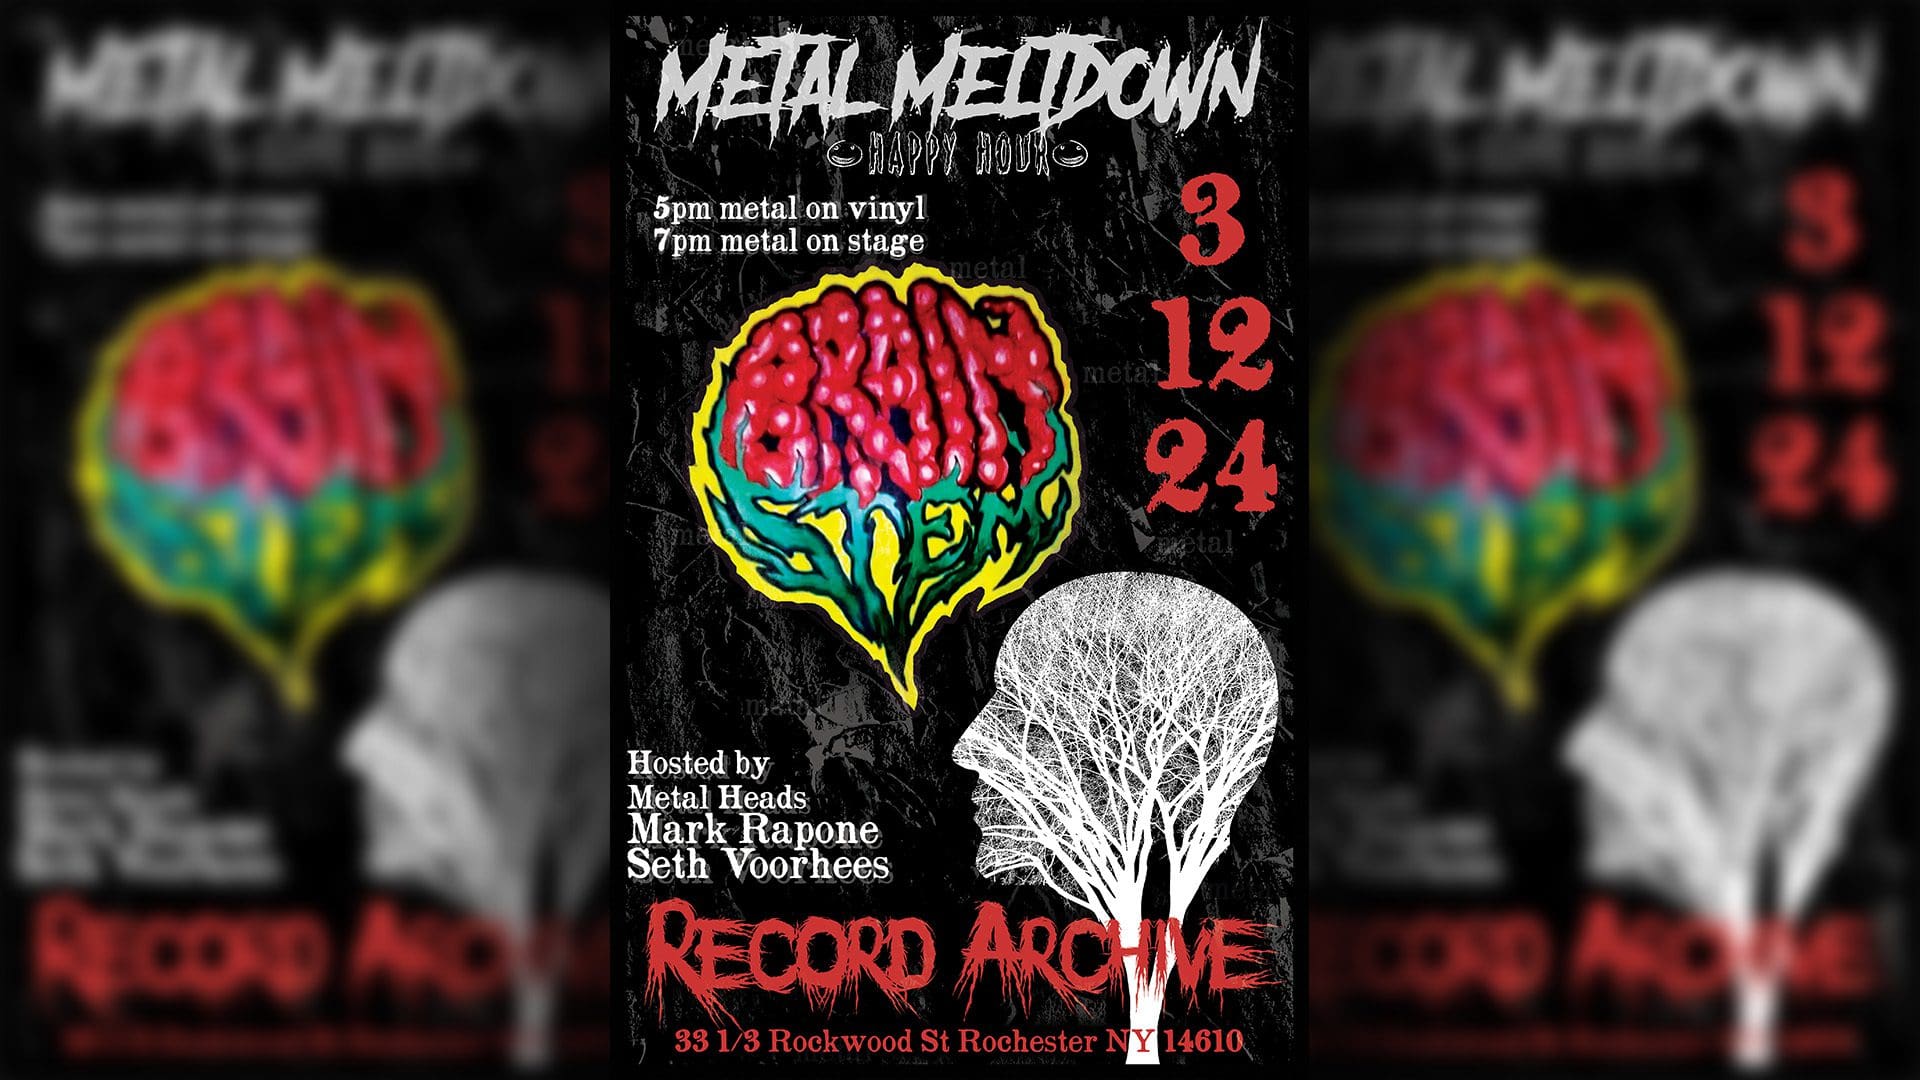 Metal Meltdown Happy Hour. 5pm metal on vinyl. 7pm metal on stage. 3-12-24. Brain Stem. Hosted by Metal Heads Mark Rapone Seth Voorhees. Record Archive 33 1/3 Rockwood St Rochester NY 14610.